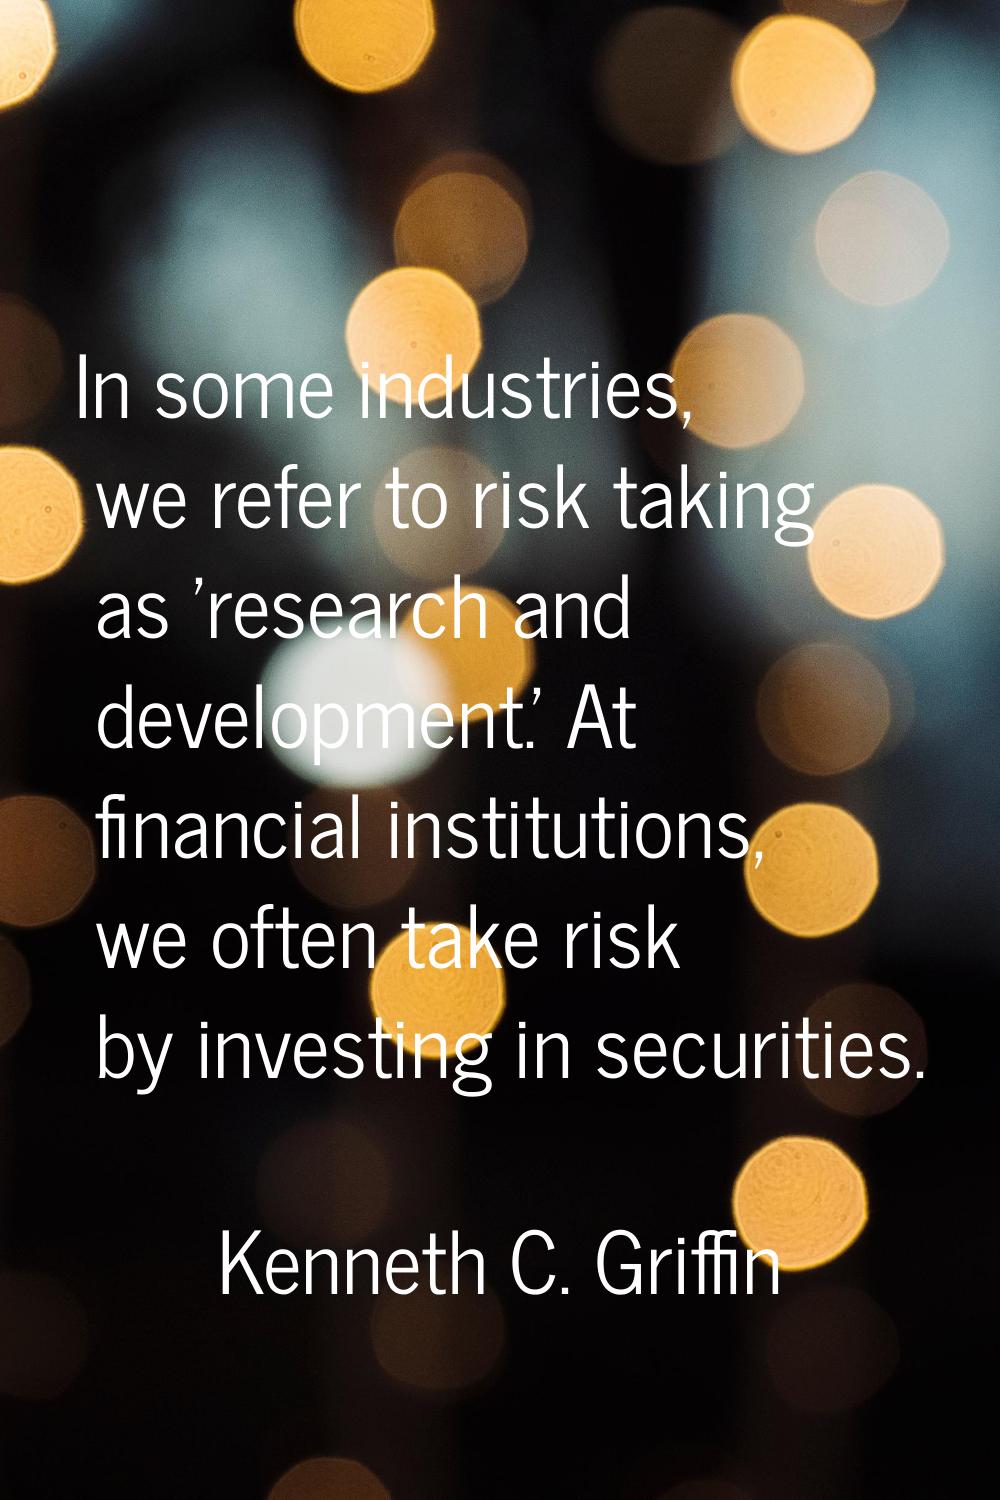 In some industries, we refer to risk taking as 'research and development.' At financial institution